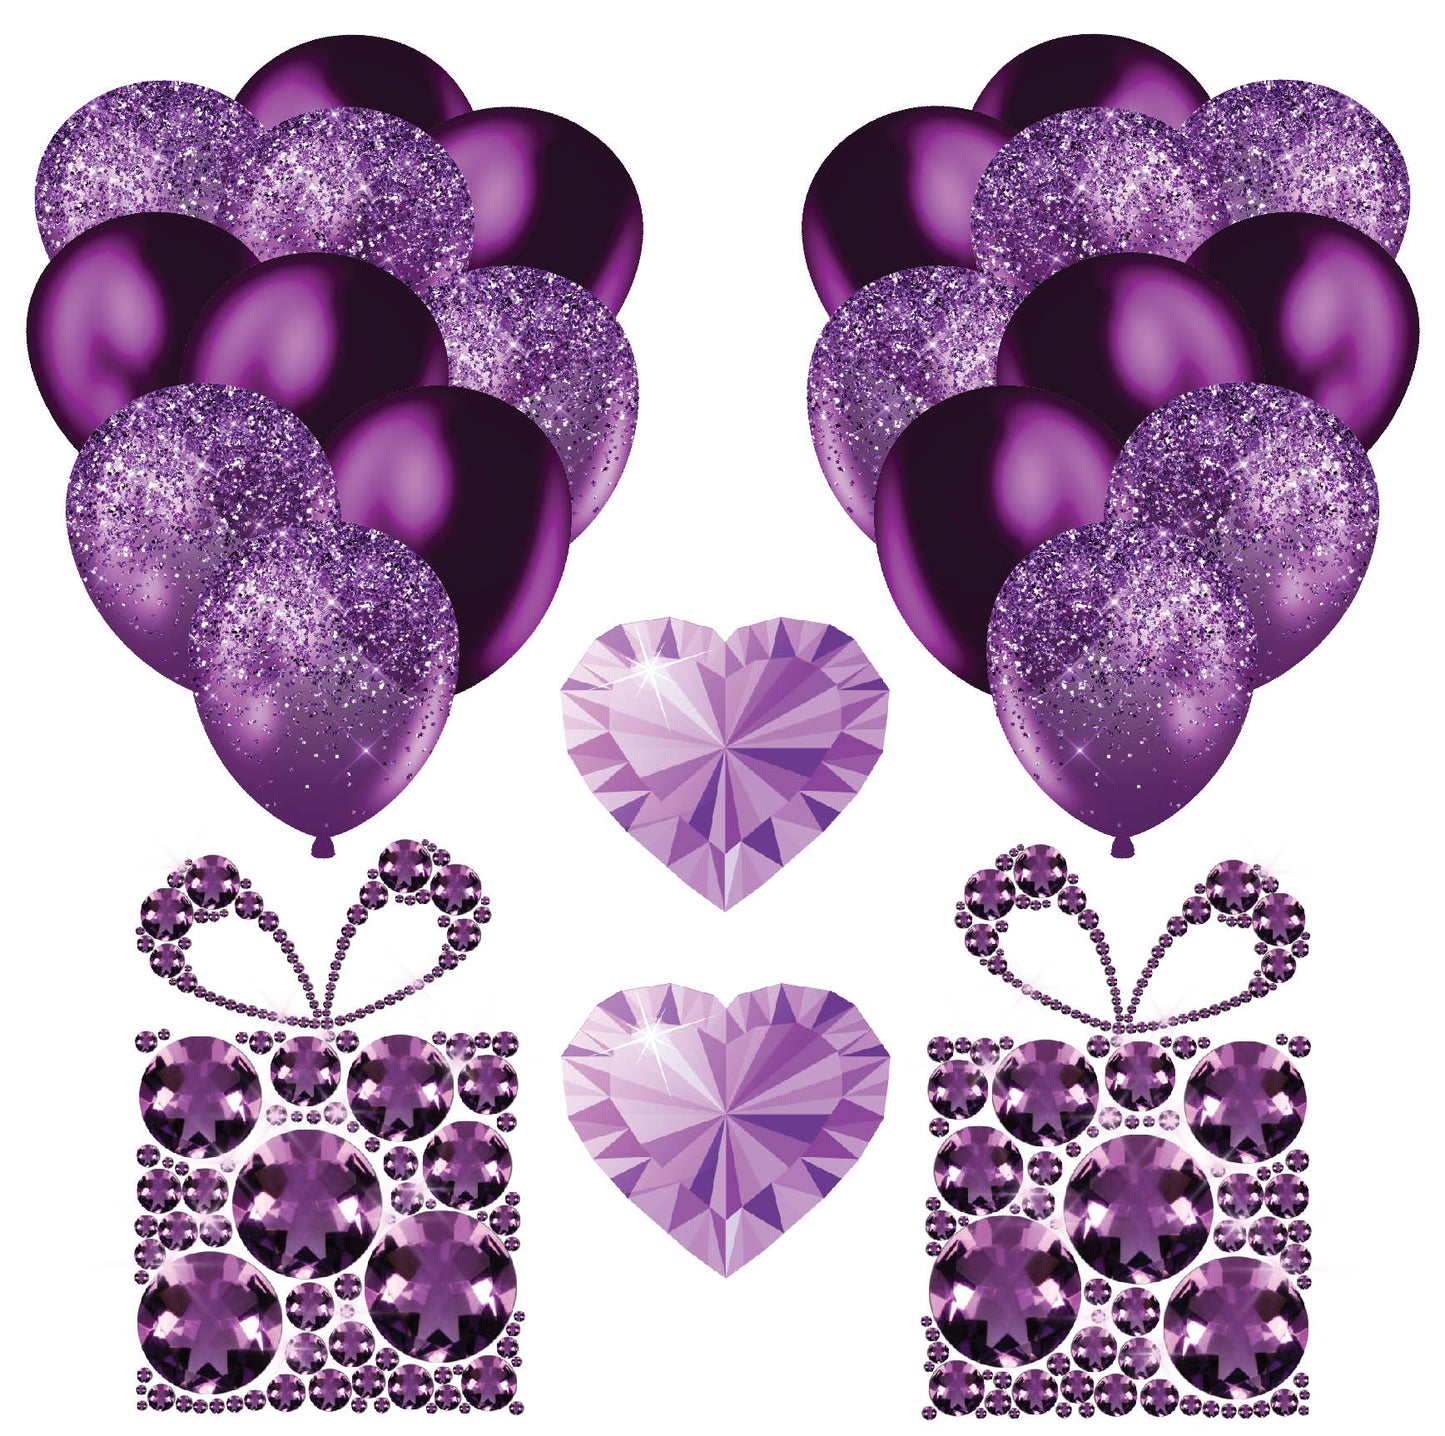 Deep Purple Balloons 2 Half Sheet  (Must Purchase 2 Half sheets - You Can Mix & Match)